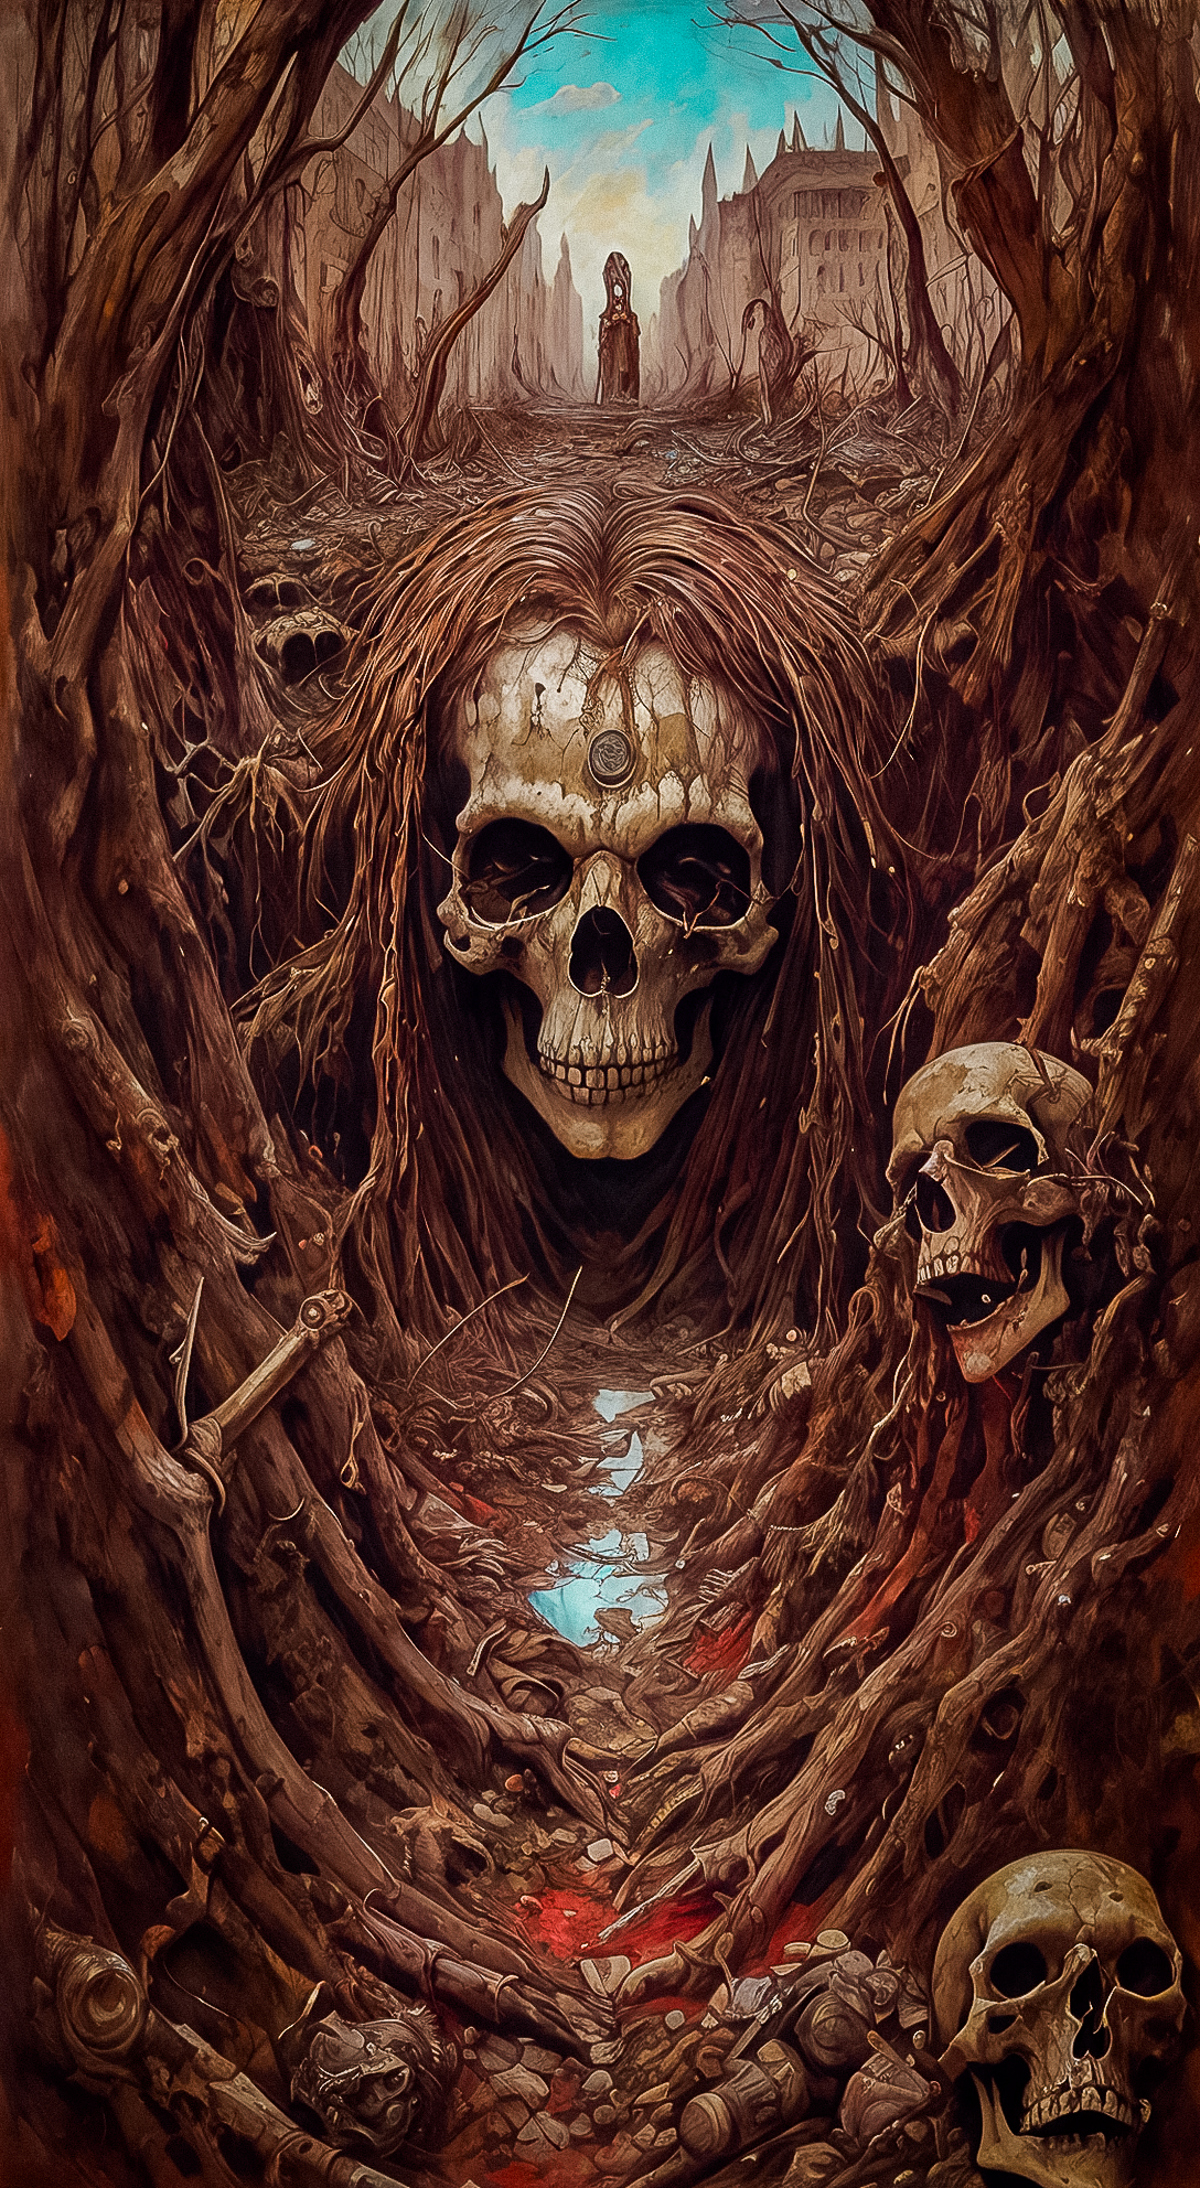 A painting of a skeleton with a skull on its head, holding a stick and surrounded by dirt, roots, and bones.